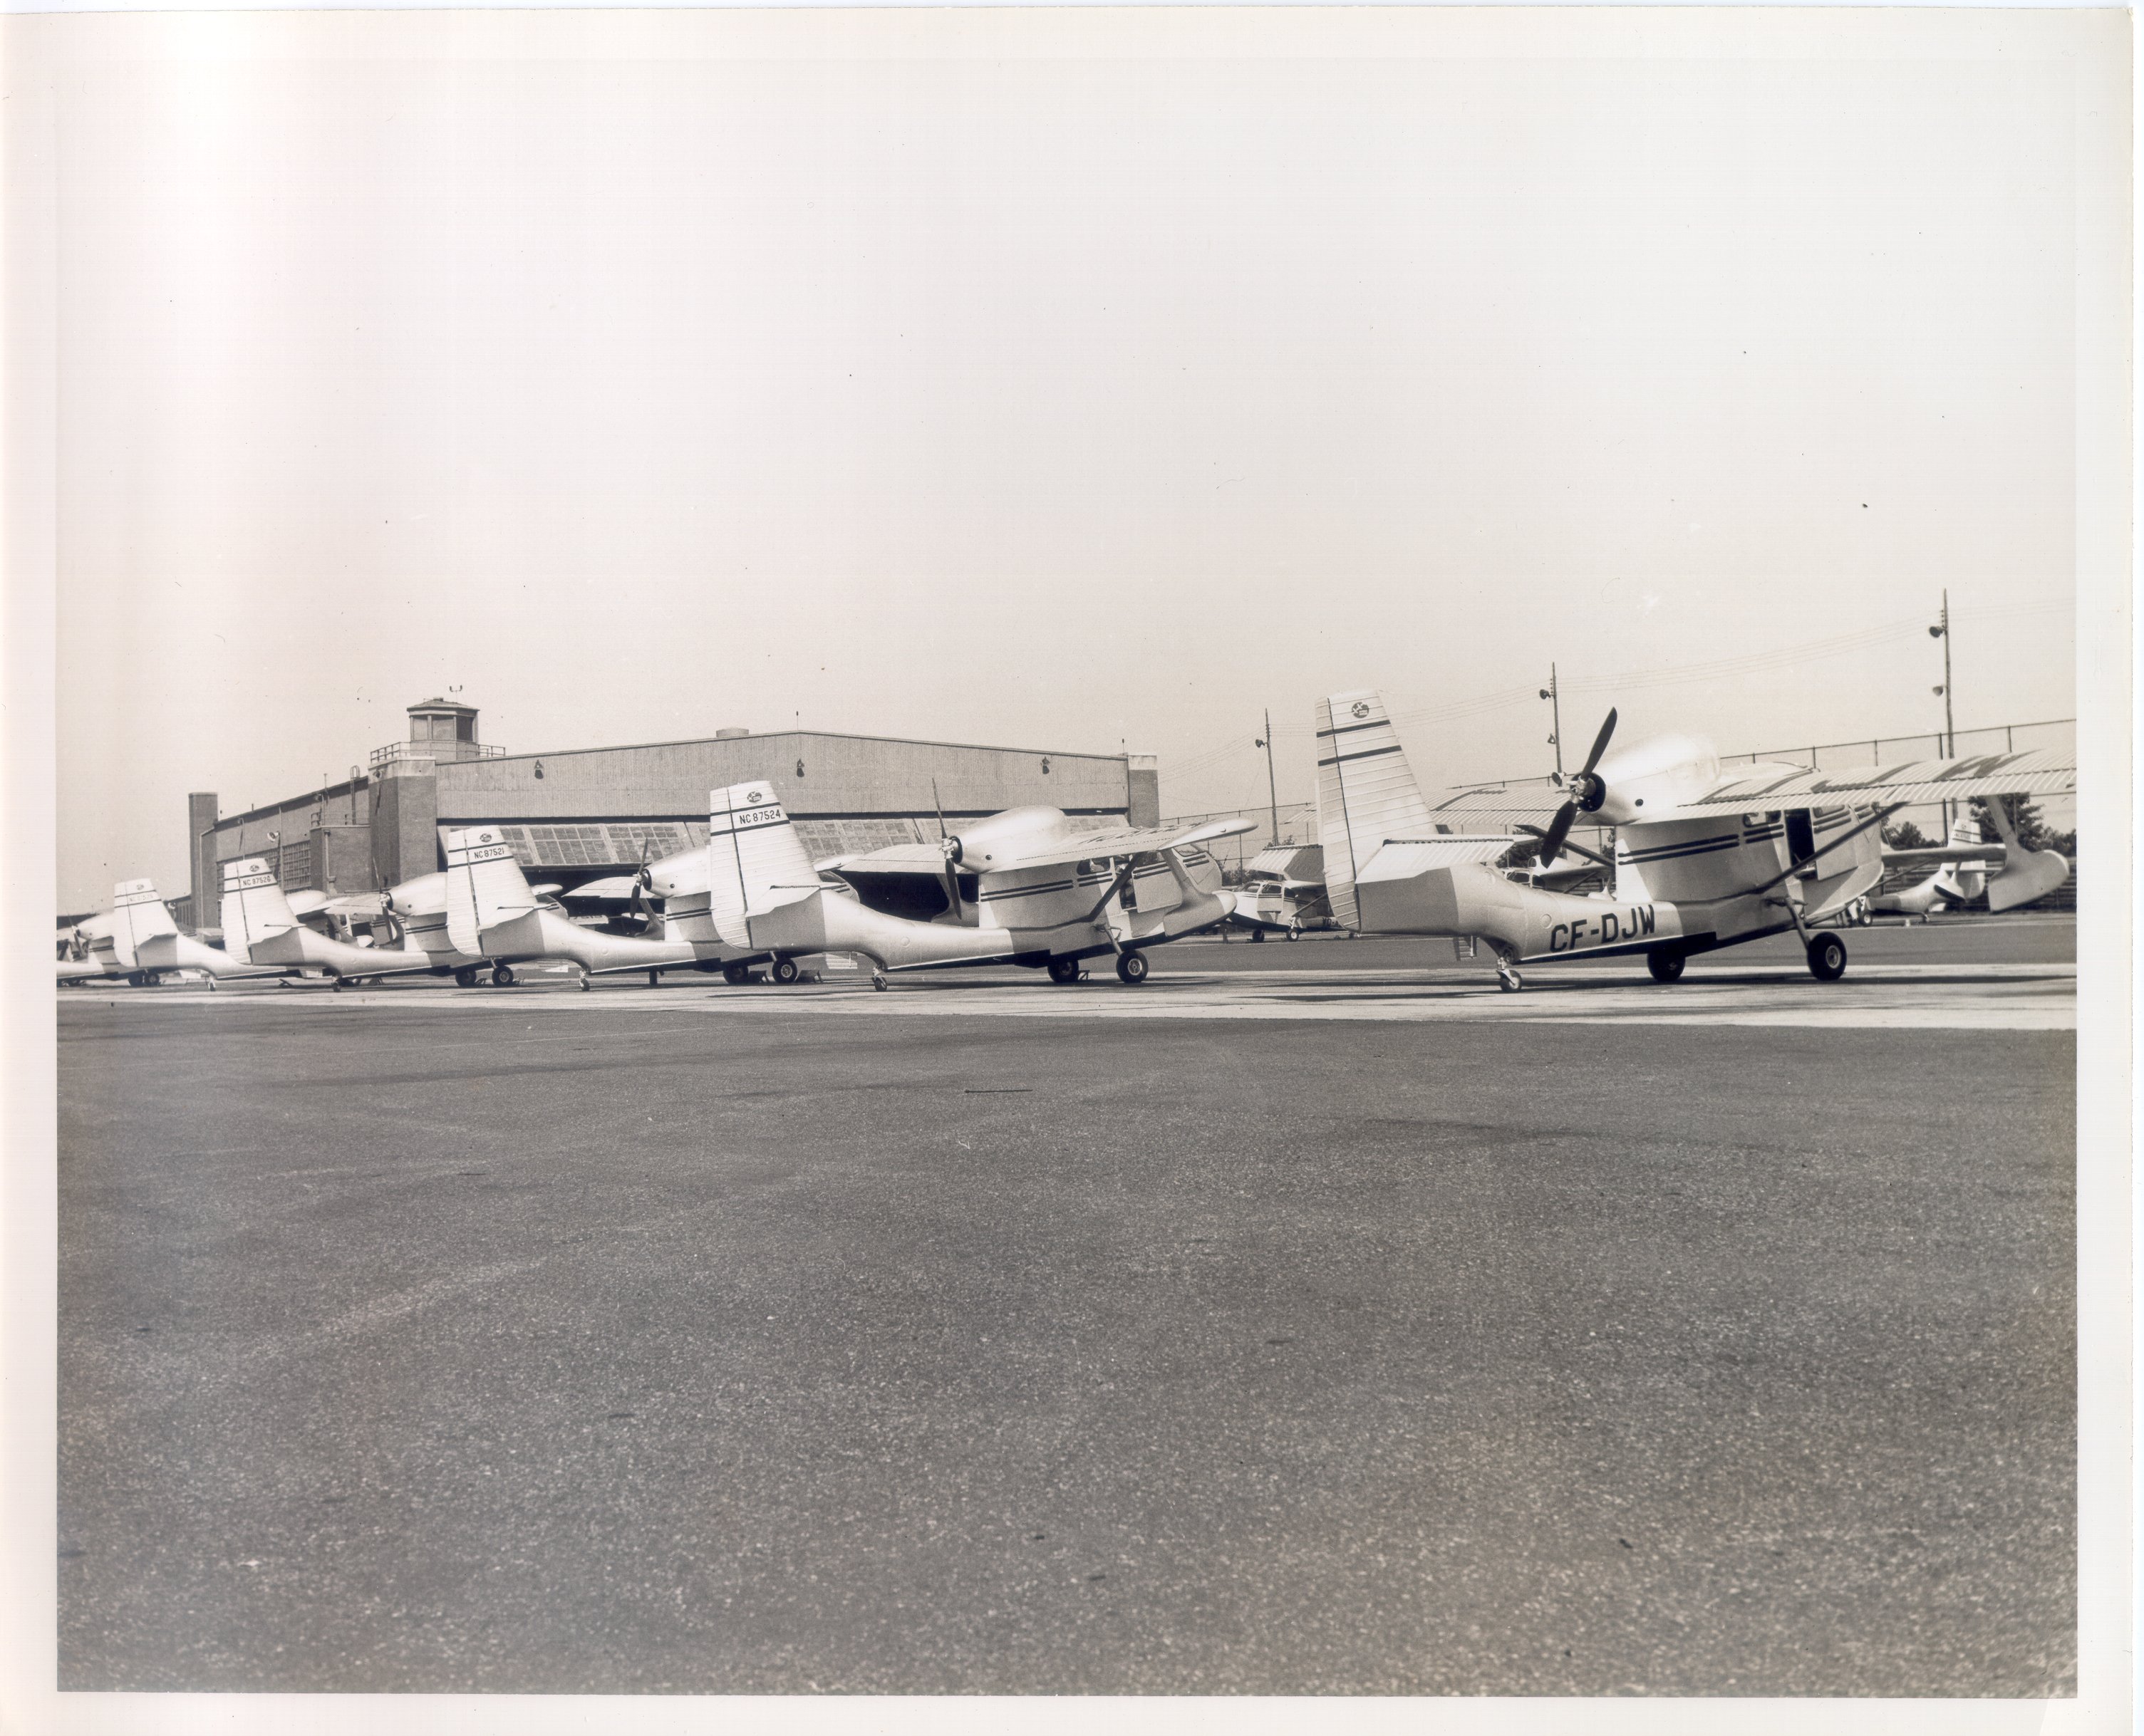 6 Seabees on the ramp